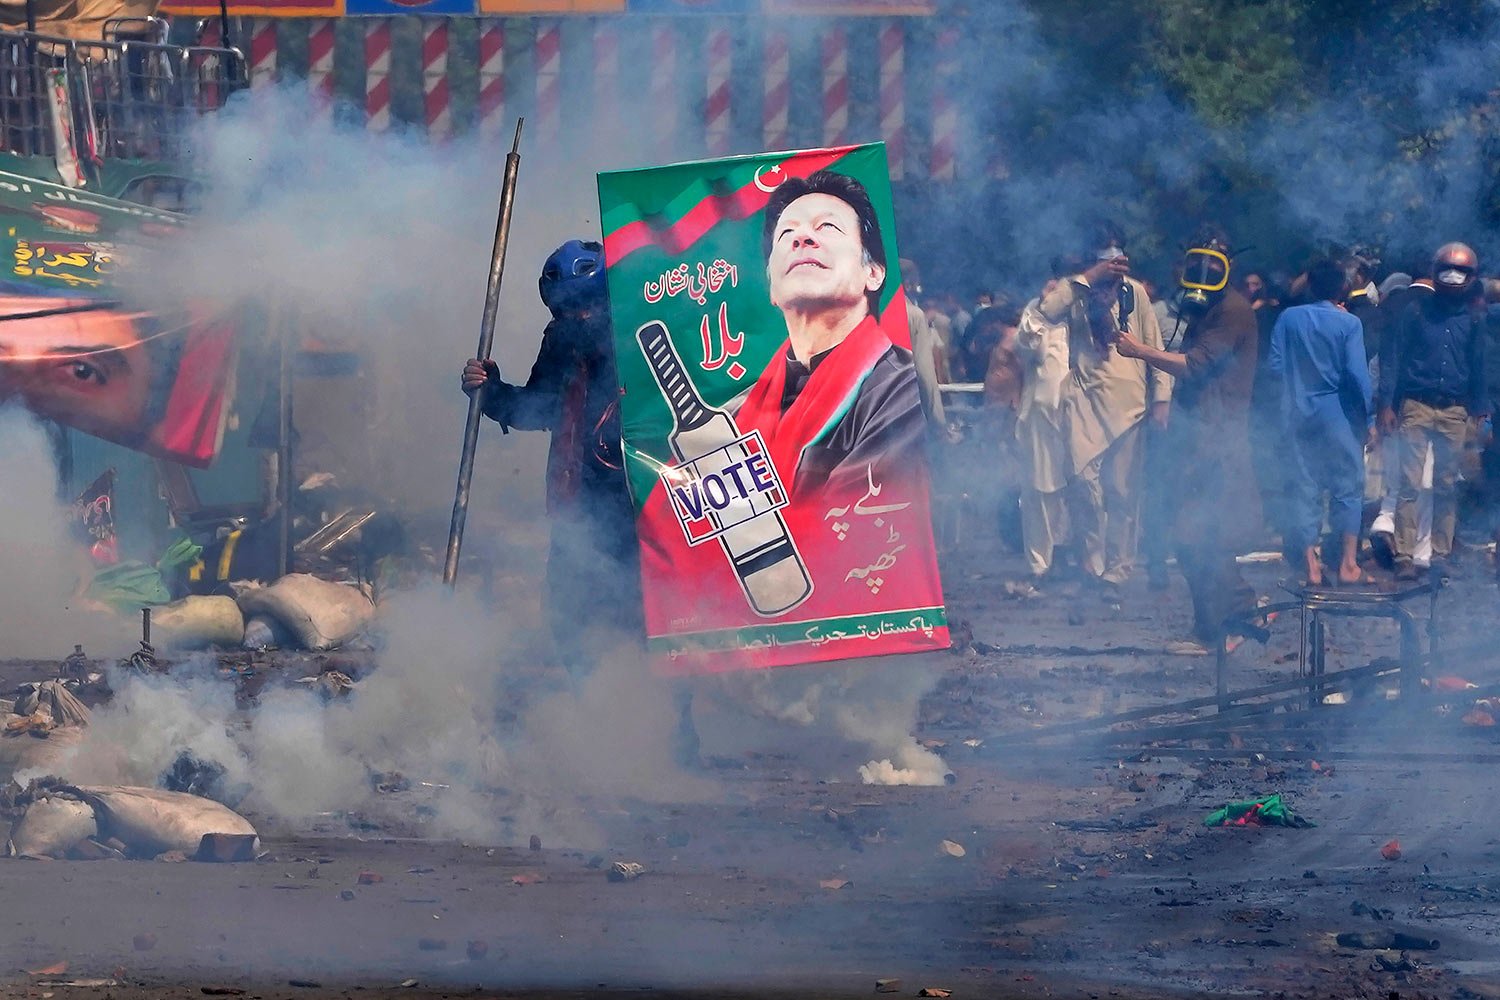  Supporters of former Prime Minister Imran Khan take cover after riot police officers fire tear gas to disperse them during clashes, in Lahore, Pakistan, Wednesday, March 15, 2023. (AP Photo/K.M. Chaudary) 